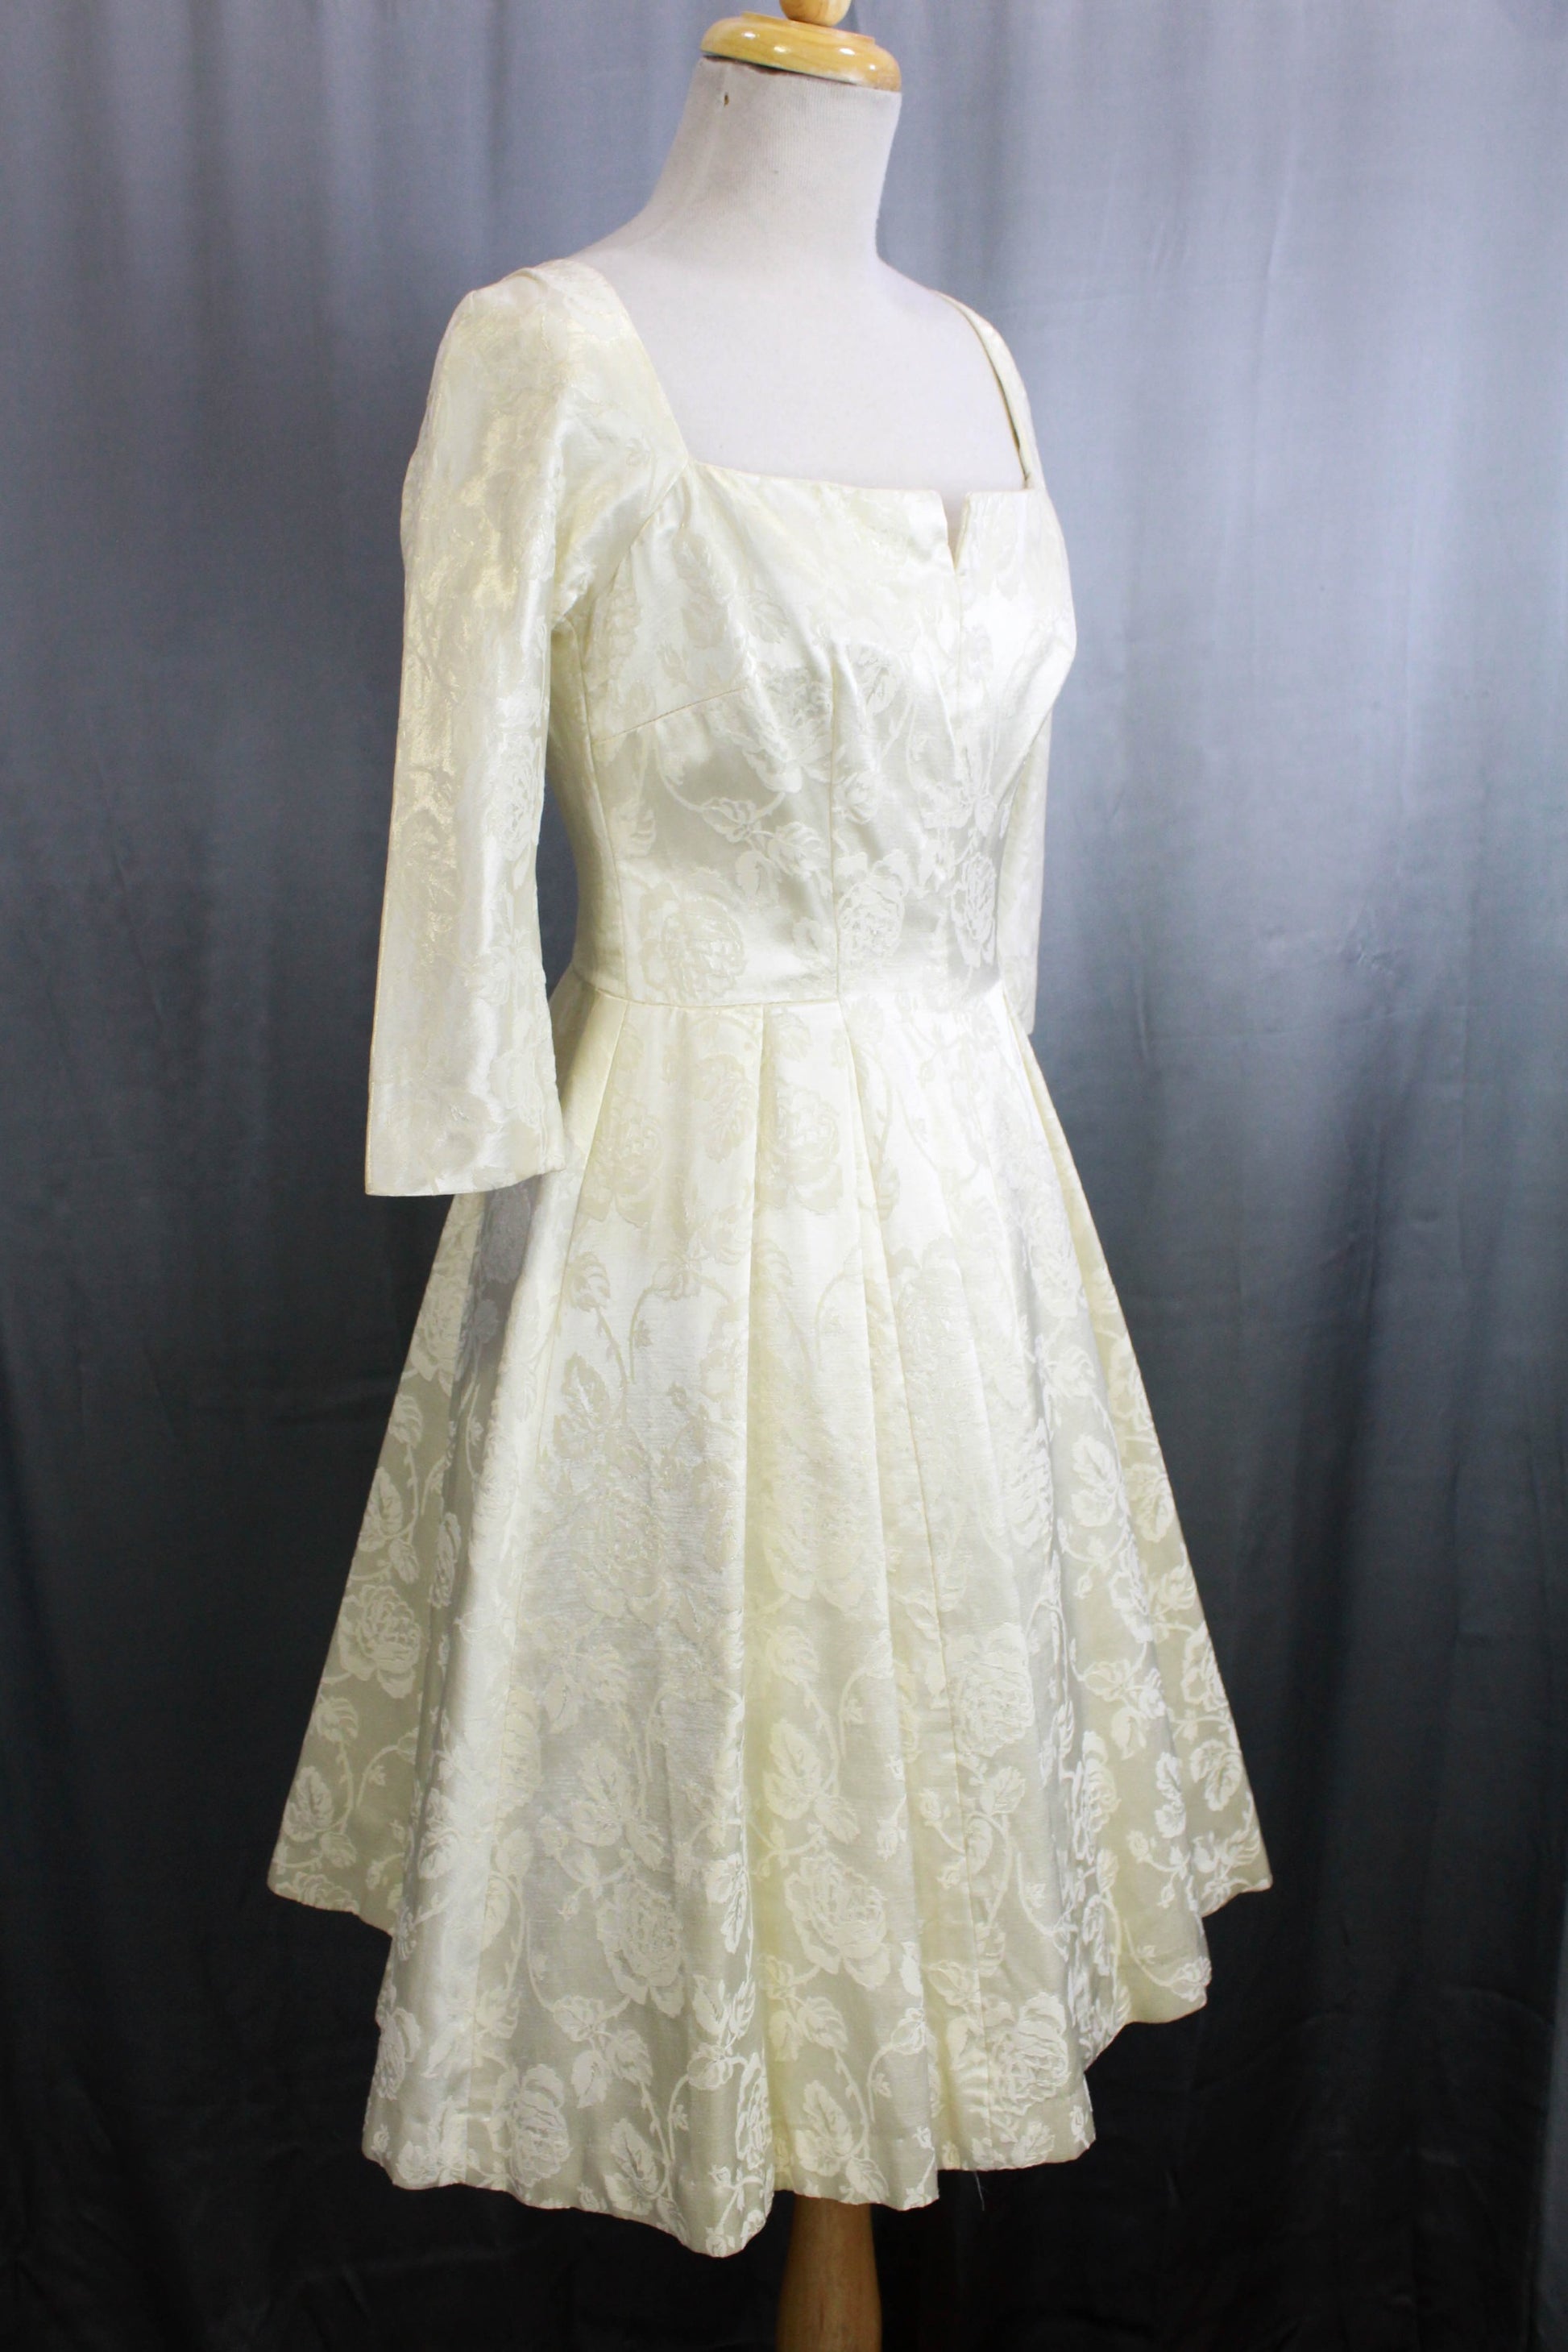 1950s bridal dress, white brocade satin with 3/4 sleeves and fit and flare silhouette